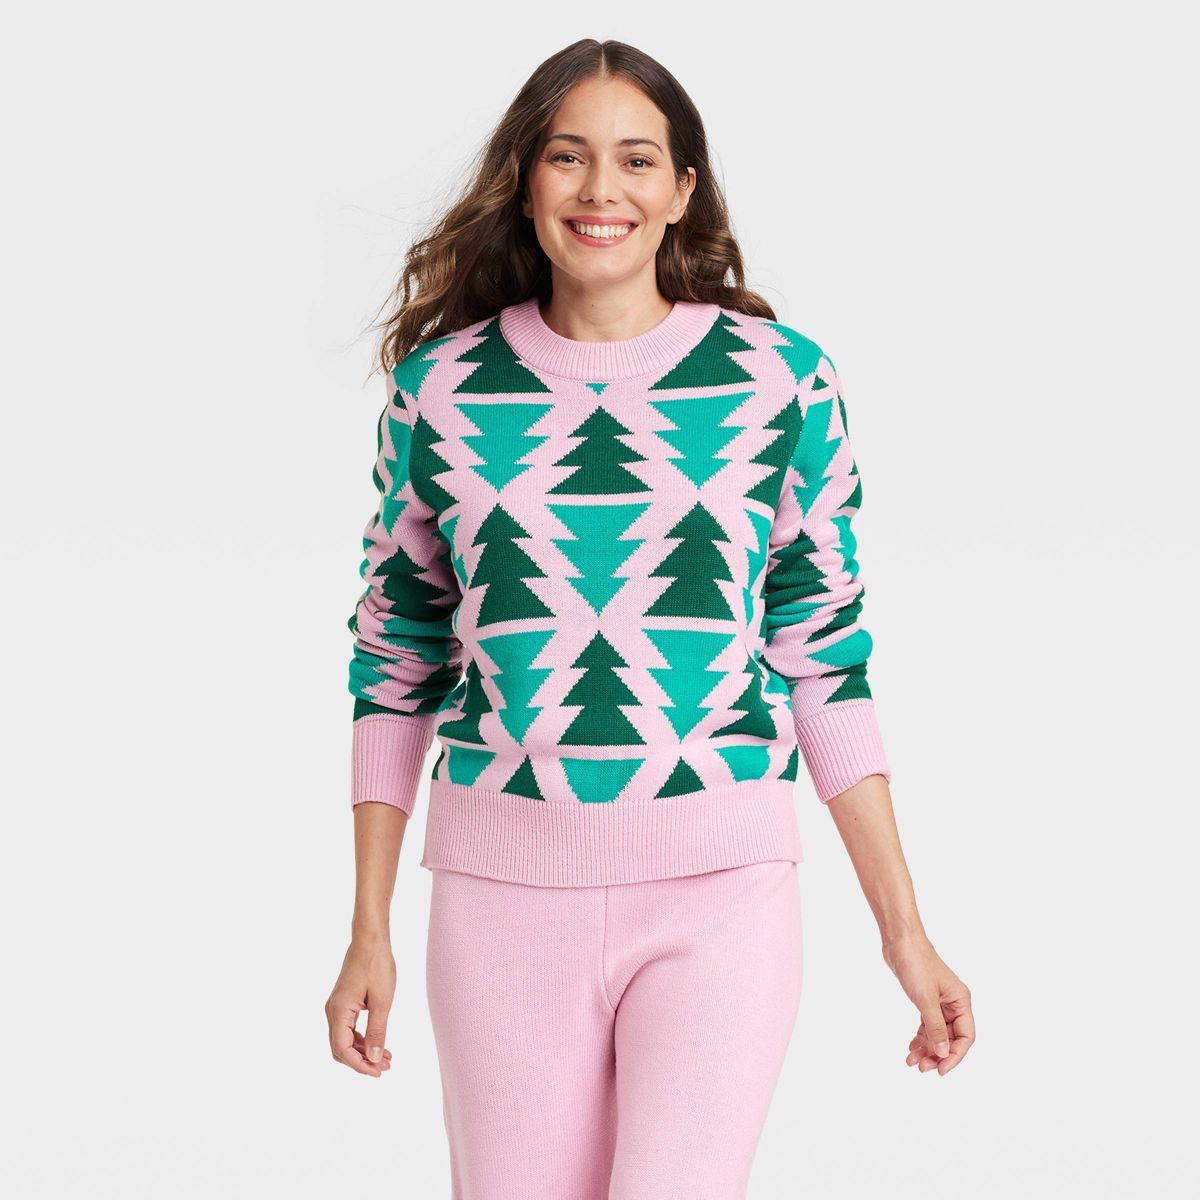 Women's Christmas Trees Graphic Sweater - S | Target